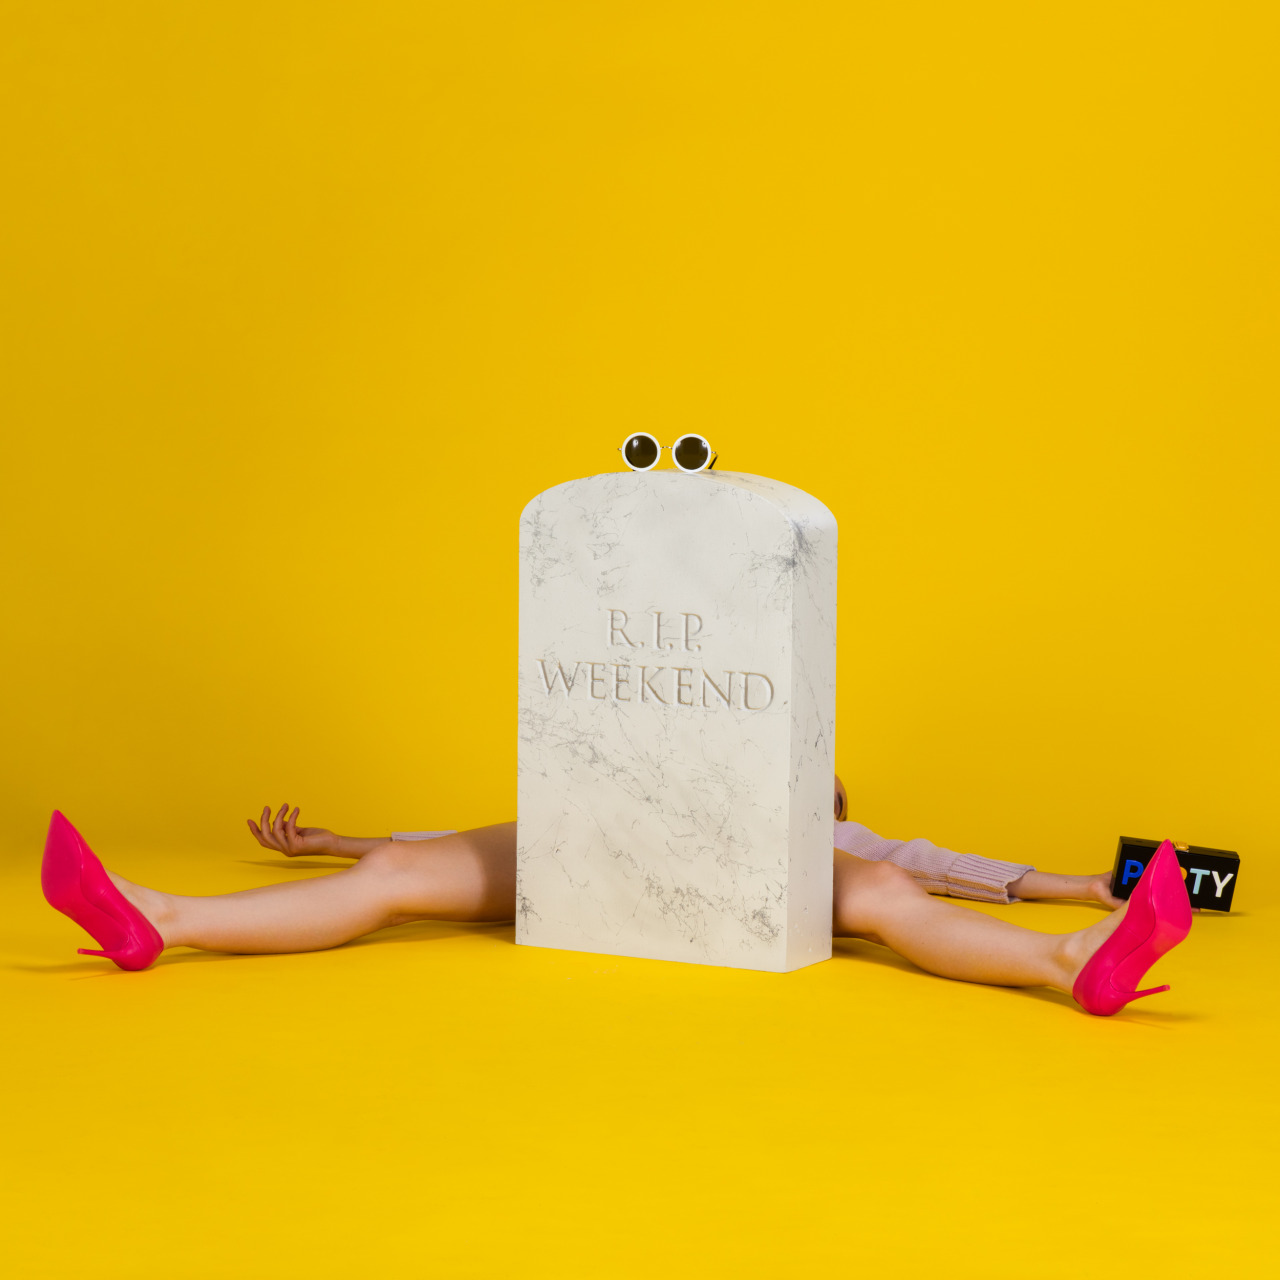 Milly Advertising Rebrand by Sagmeister & Walsh
“MILLY (by Michelle Smith) wanted to rebrand their advertising and communications to reflect the attributes of their new collections: edgy, irreverent, bold and colorful. When Michelle established the...